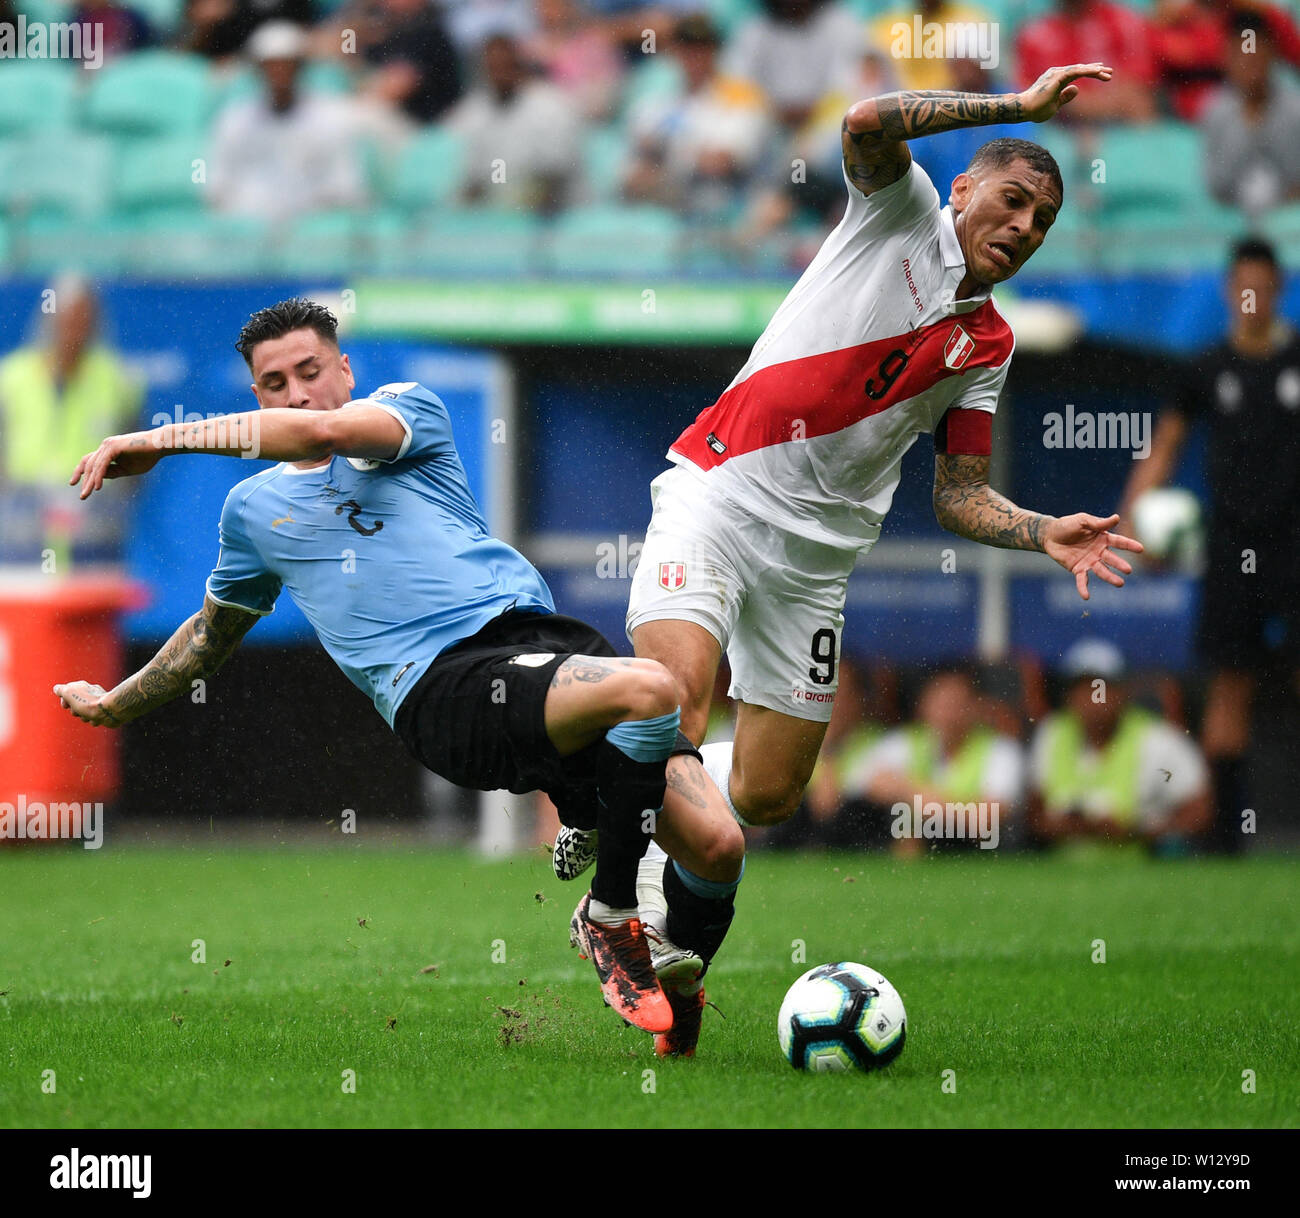 Salvador, Brazil. 29th June, 2019. Uruguay's Jose Maria Gimenez (L) competes with Paolo Guerrero of Peru during the Copa America 2019 quarterfinal match between Uruguay and Peru in Salvador, Brazil, June 29, 2019. Peru won 5-4 in penalty shoot-out. Credit: Xin Yuewei/Xinhua/Alamy Live News Stock Photo